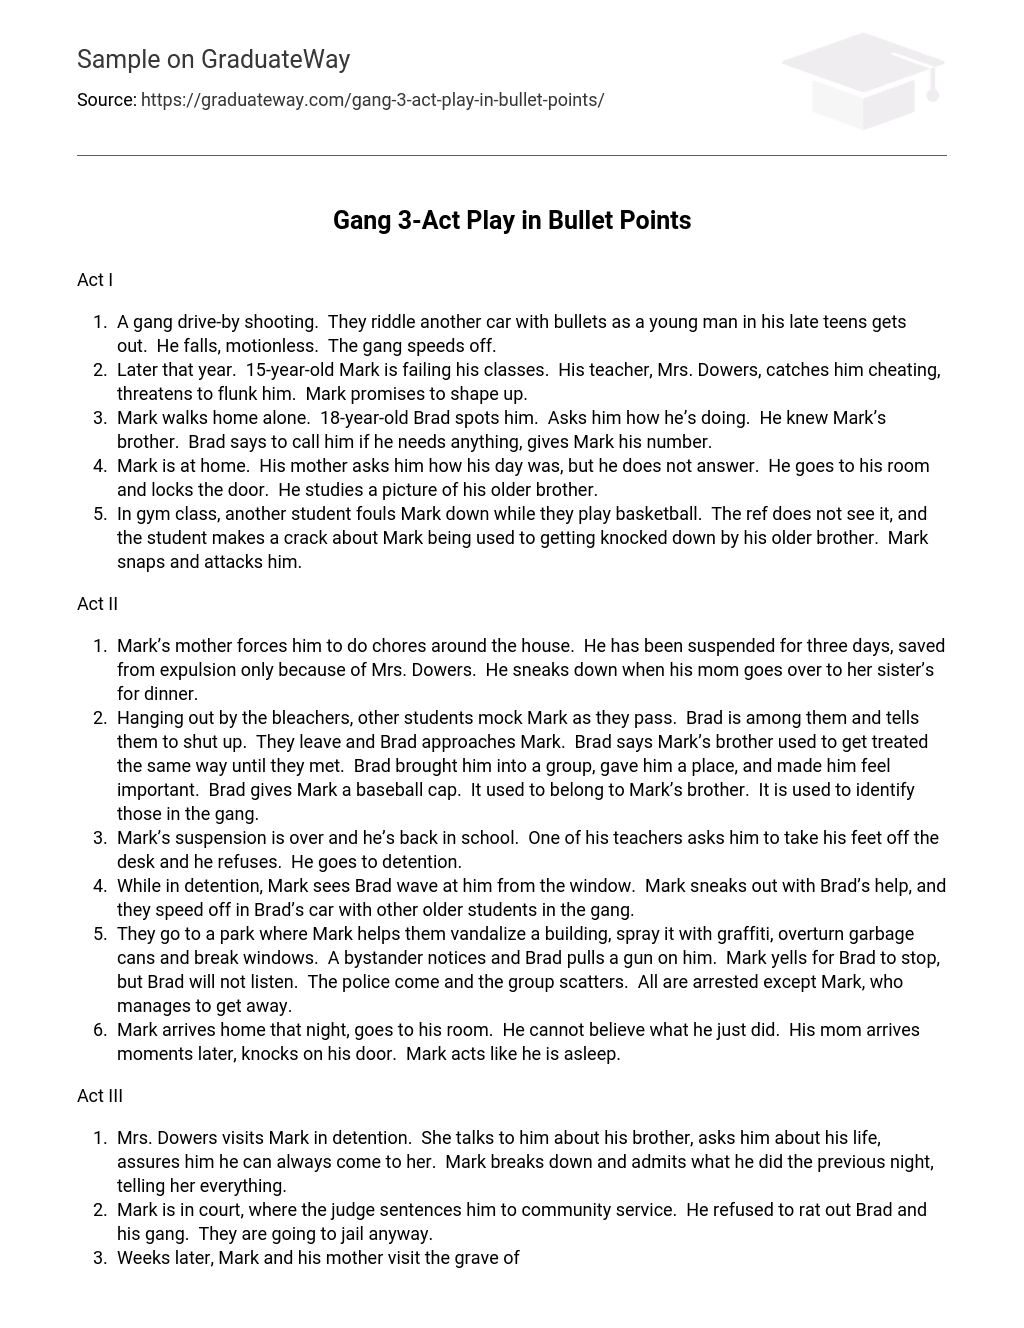 Gang 3-Act Play in Bullet Points